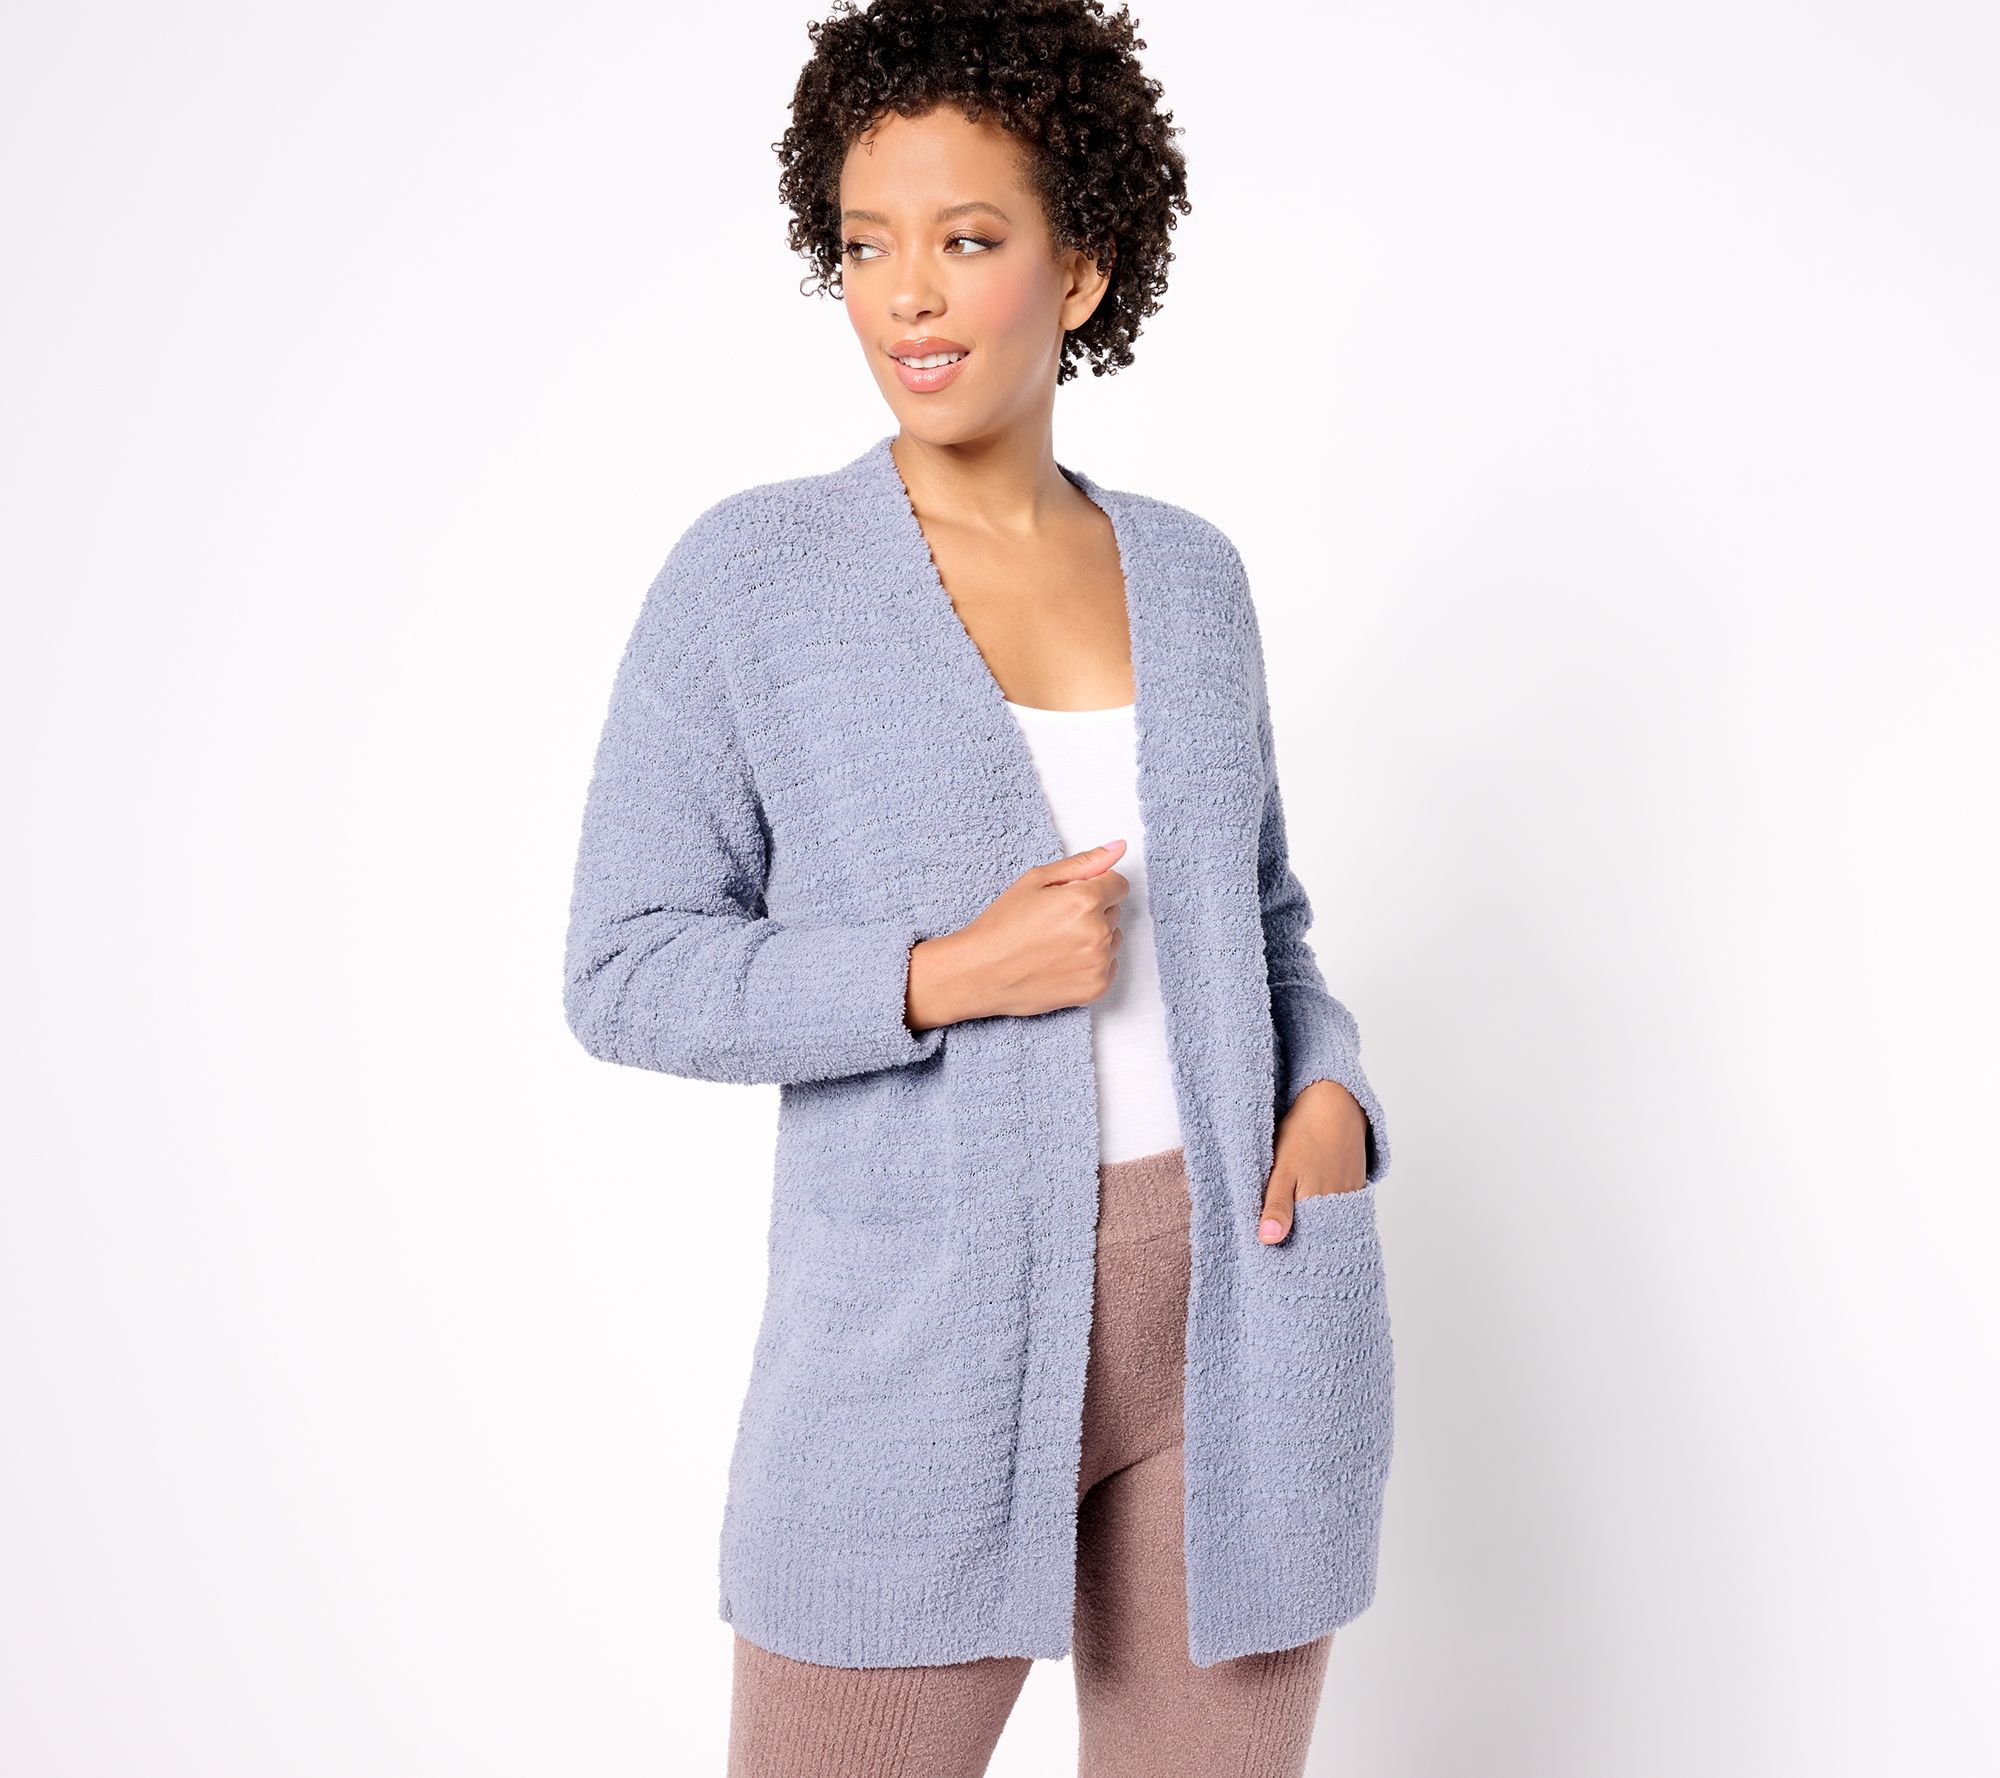 Barefoot Dreams Sweaters, Loungewear More Are on Sale